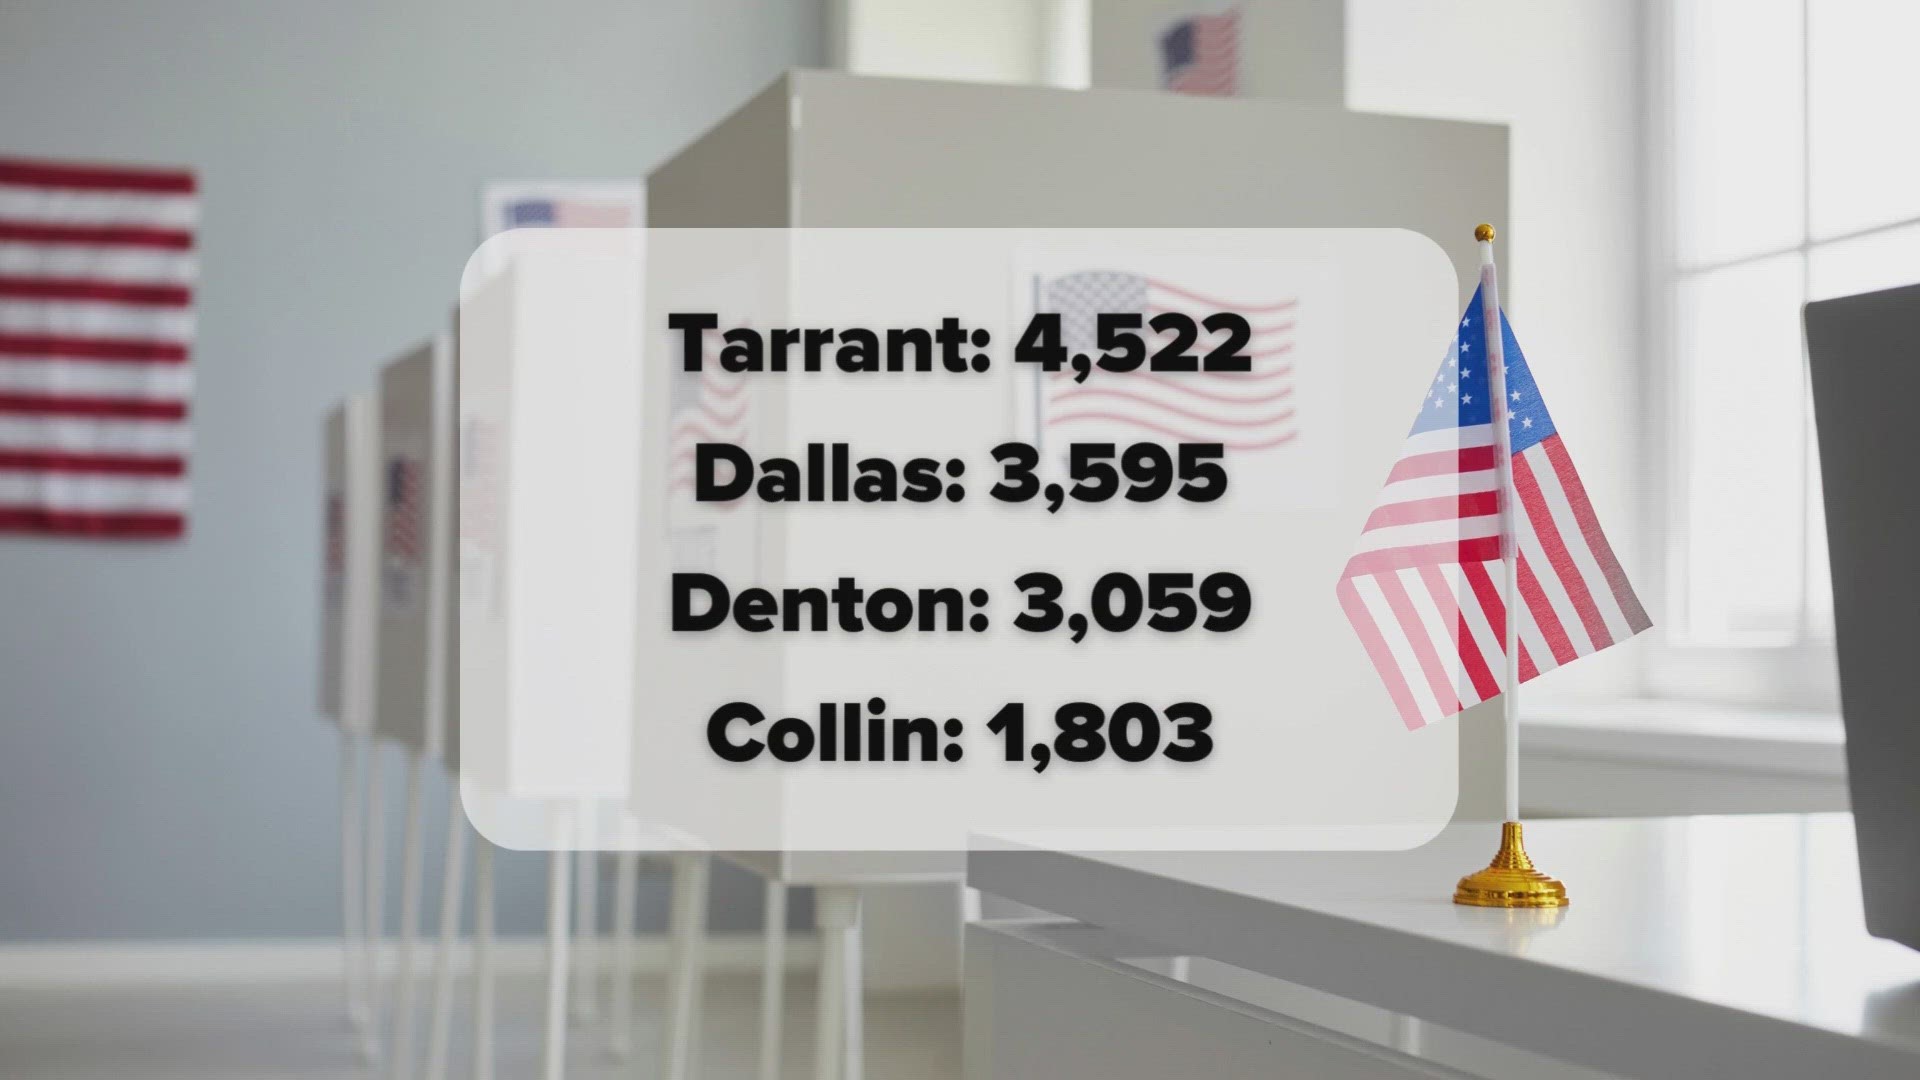 Tarrant County saw the most with 4,522 voters.